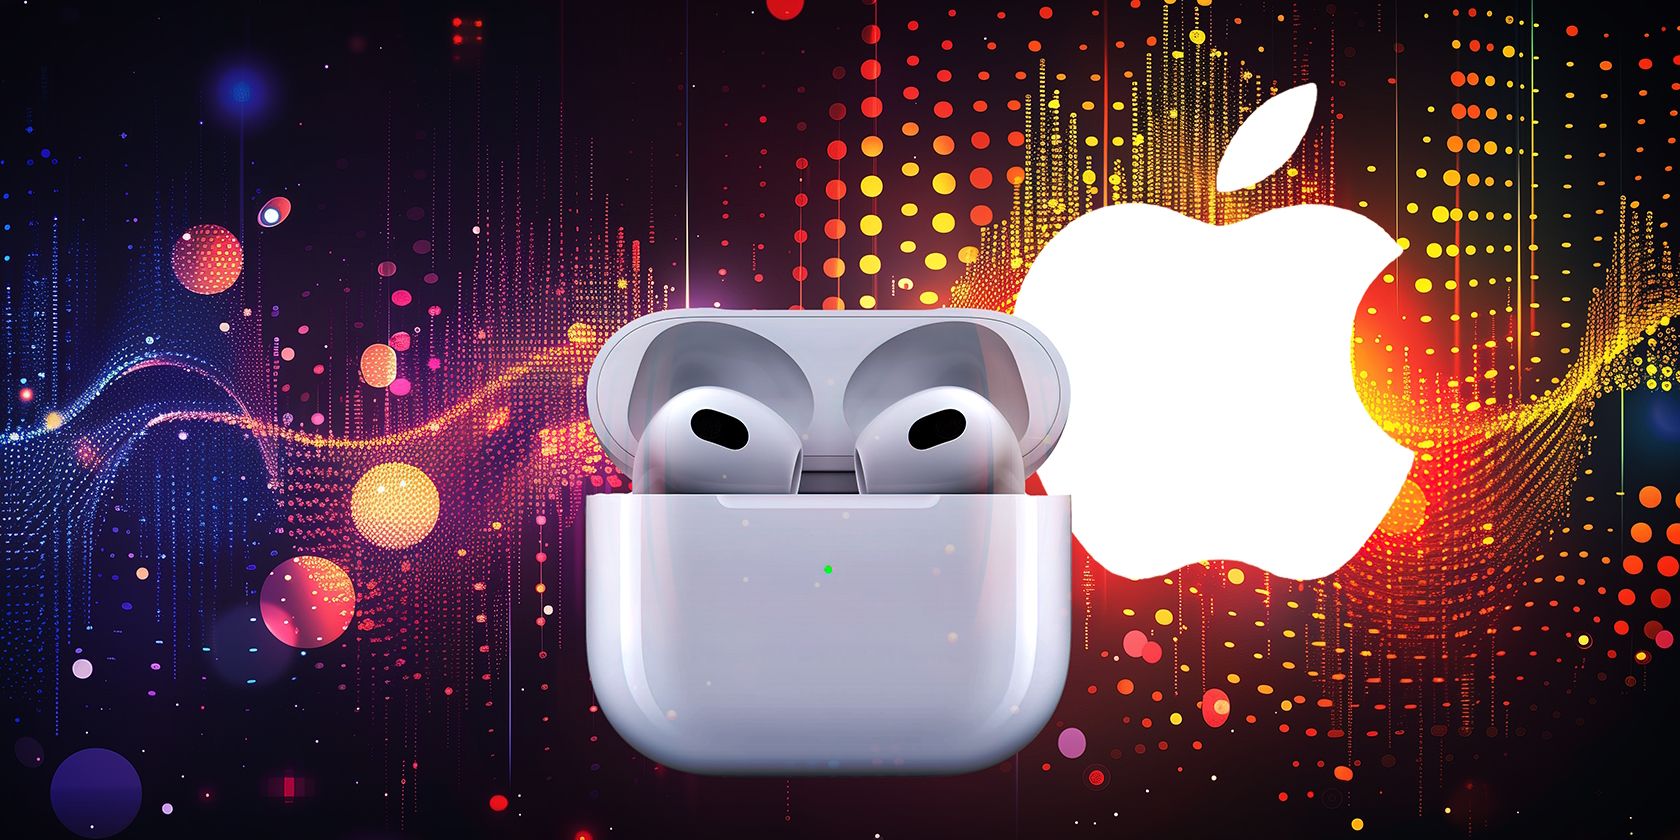 Open Apple AirPods against a vibrant digital backdrop with the Apple logo